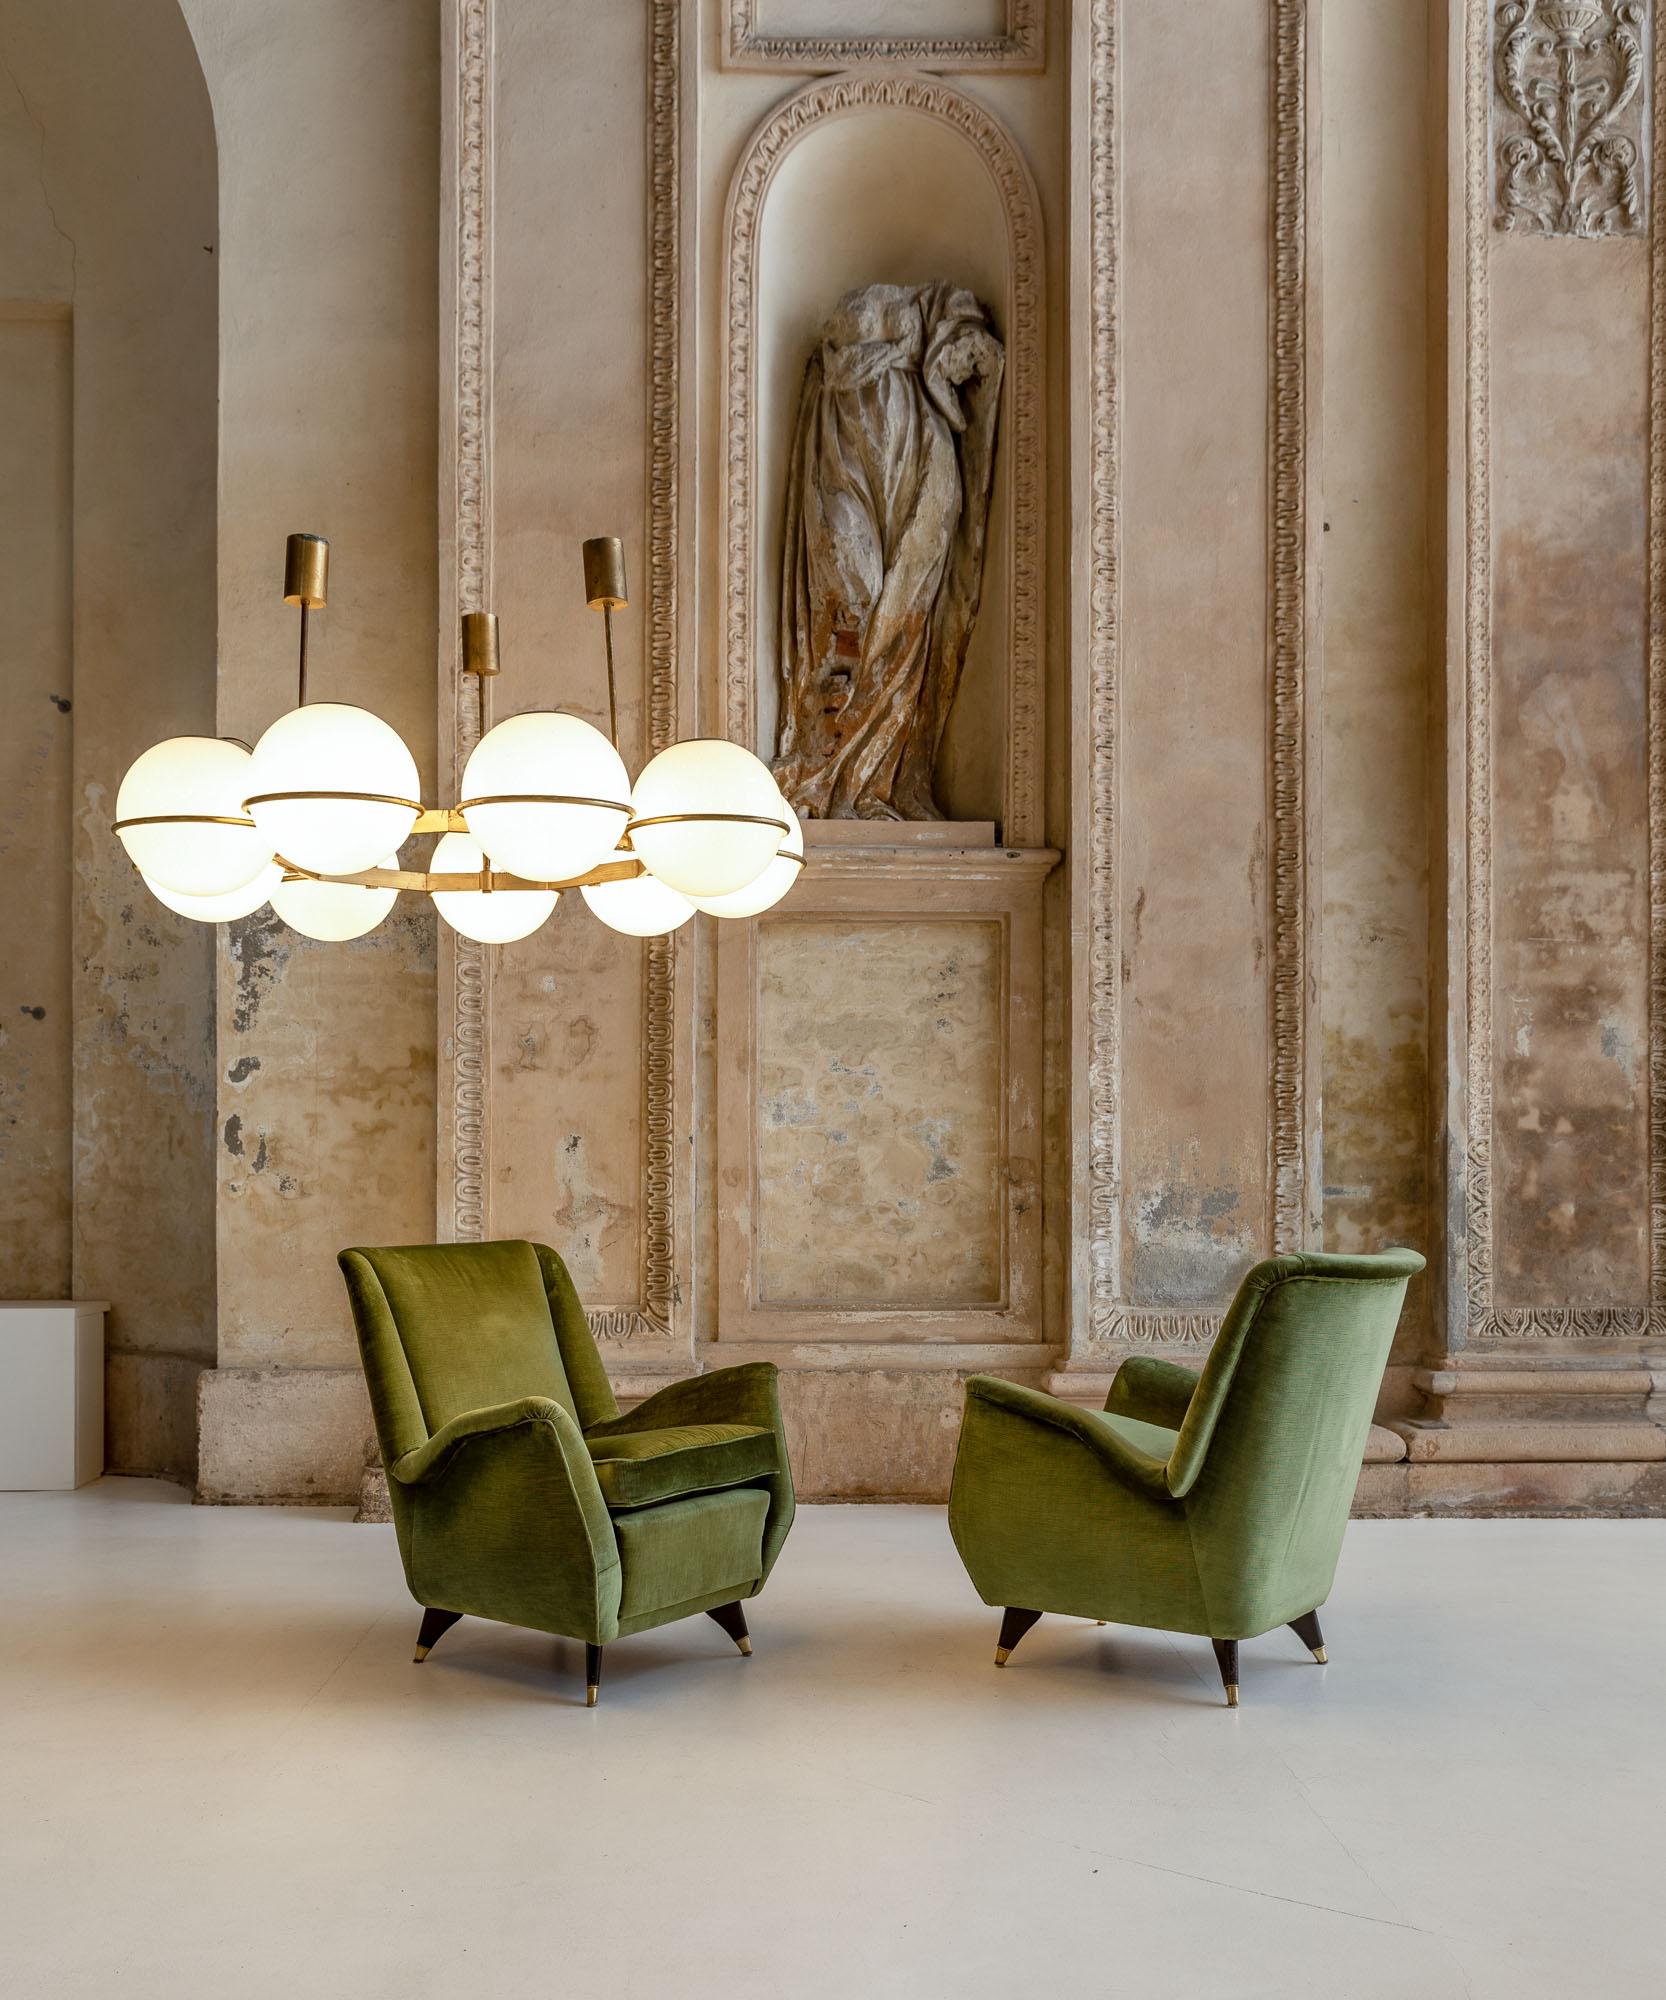 Iconic pair of green velvet armchairs by Isa.
Tapered wood and brass feet and very elegant shape and comfortable seats.
Original velvet upholstering.